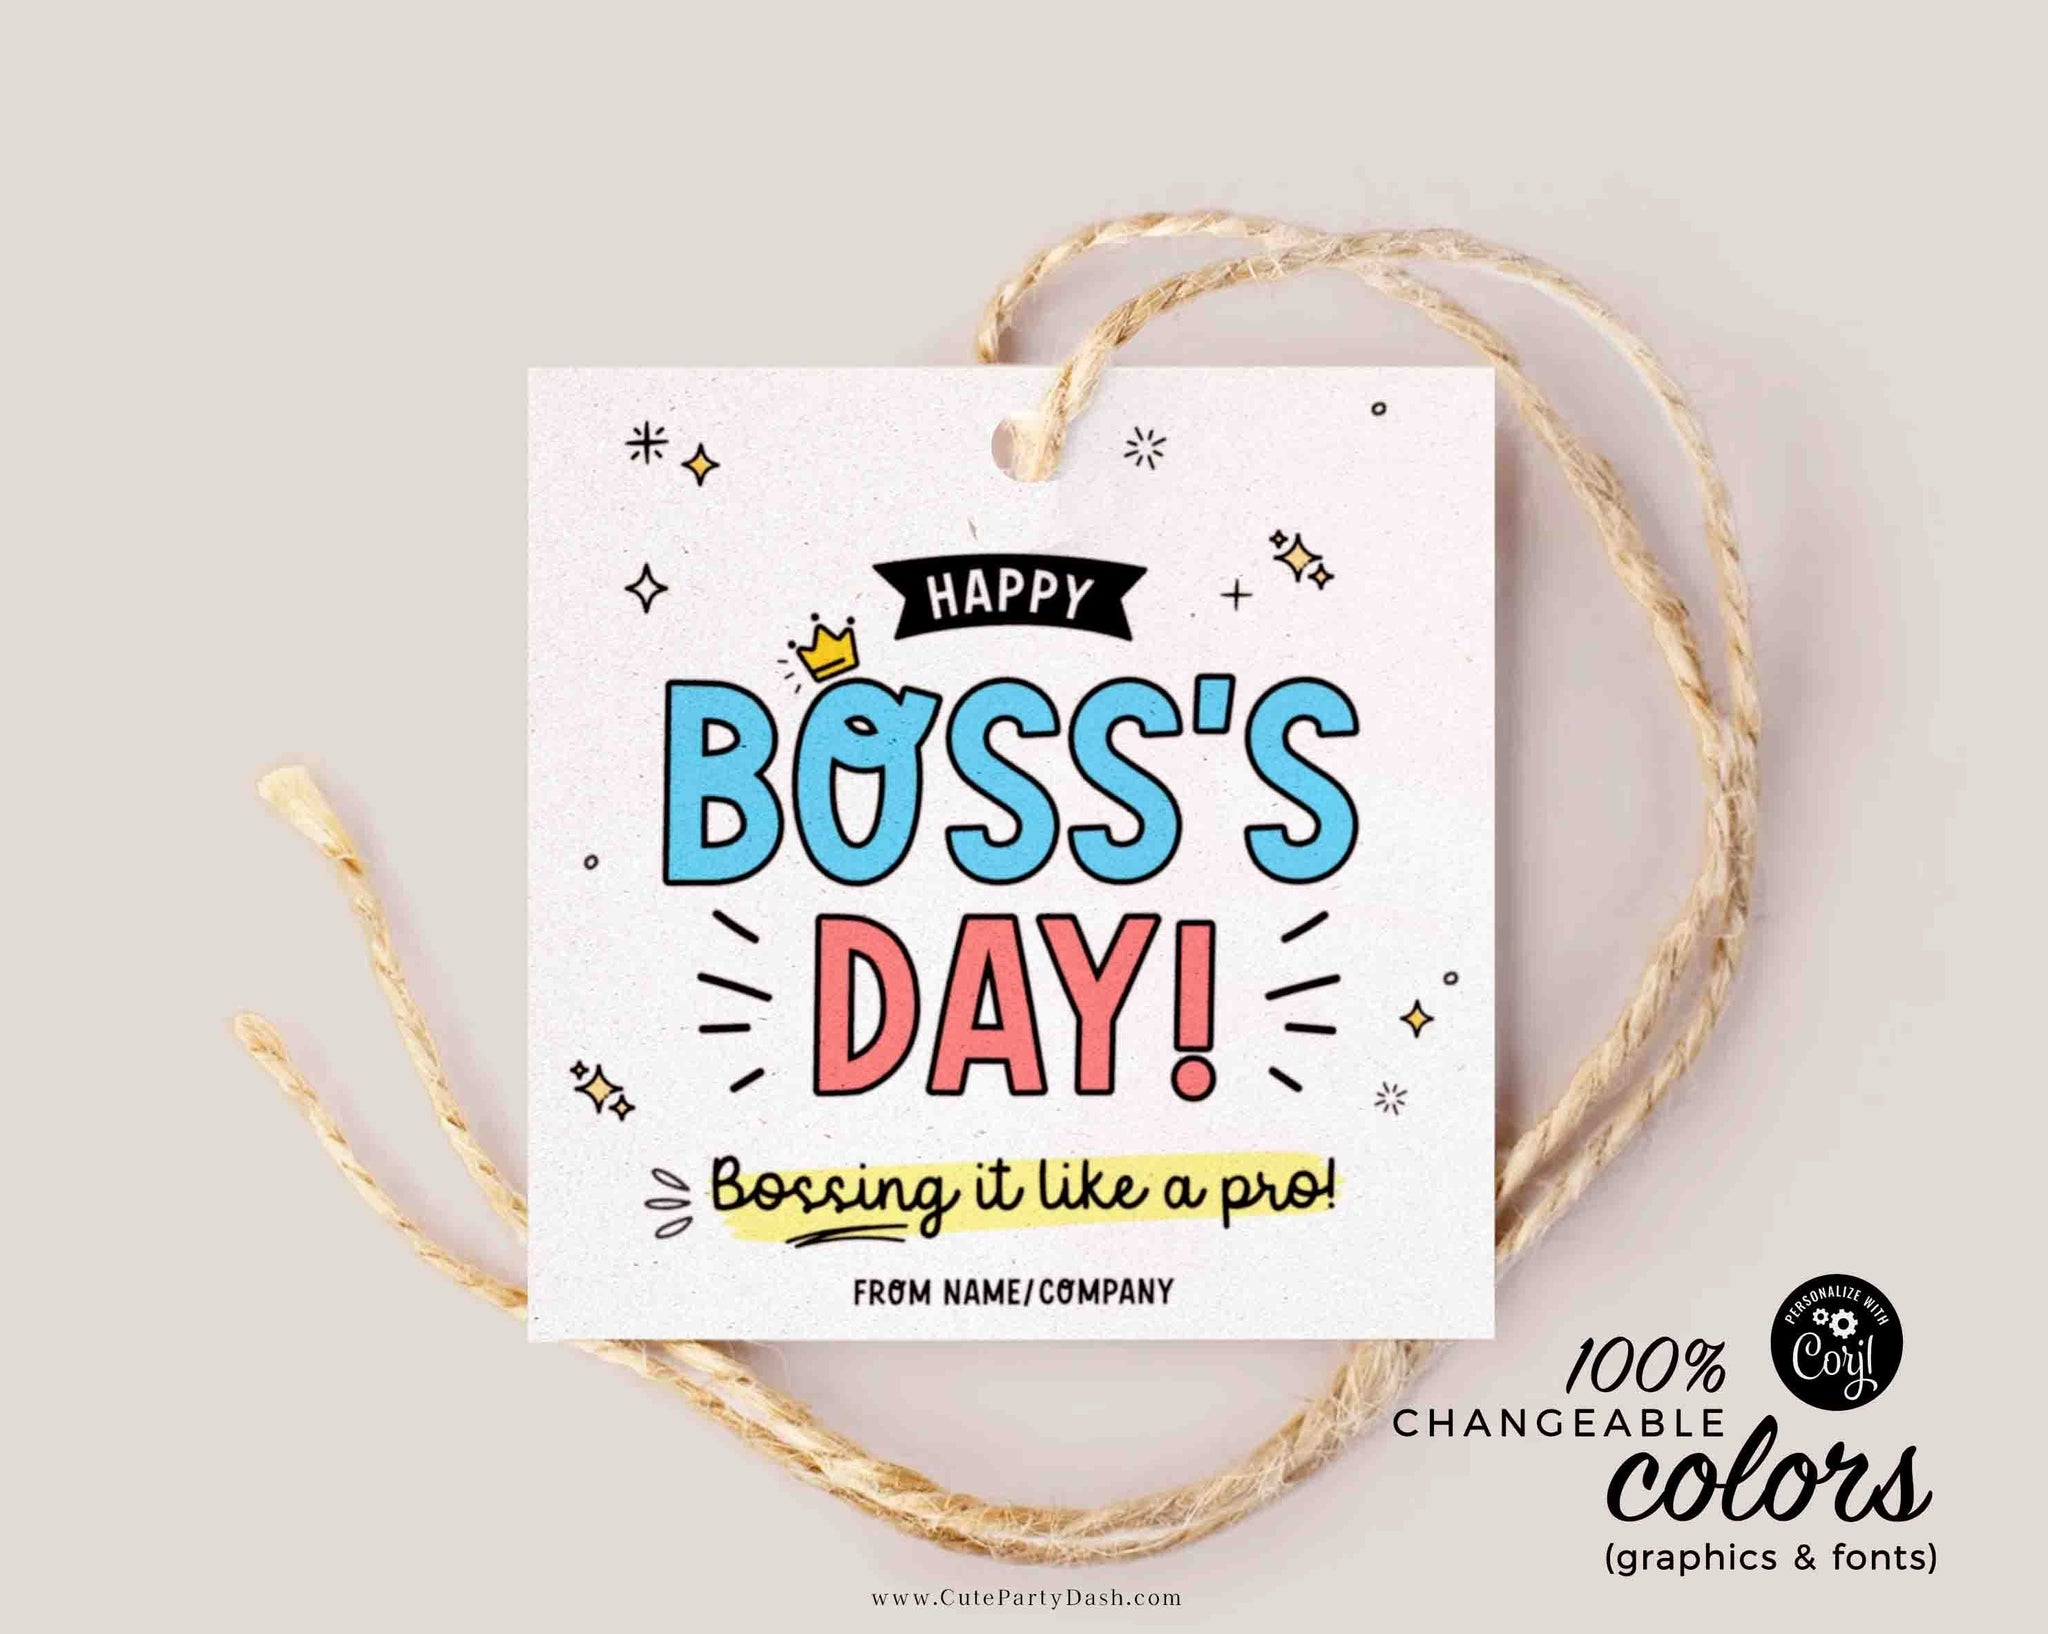 Corporate Gifts For Women's Day 2023 | Best Women's Day Corporate Gifts  Ideas - FNP